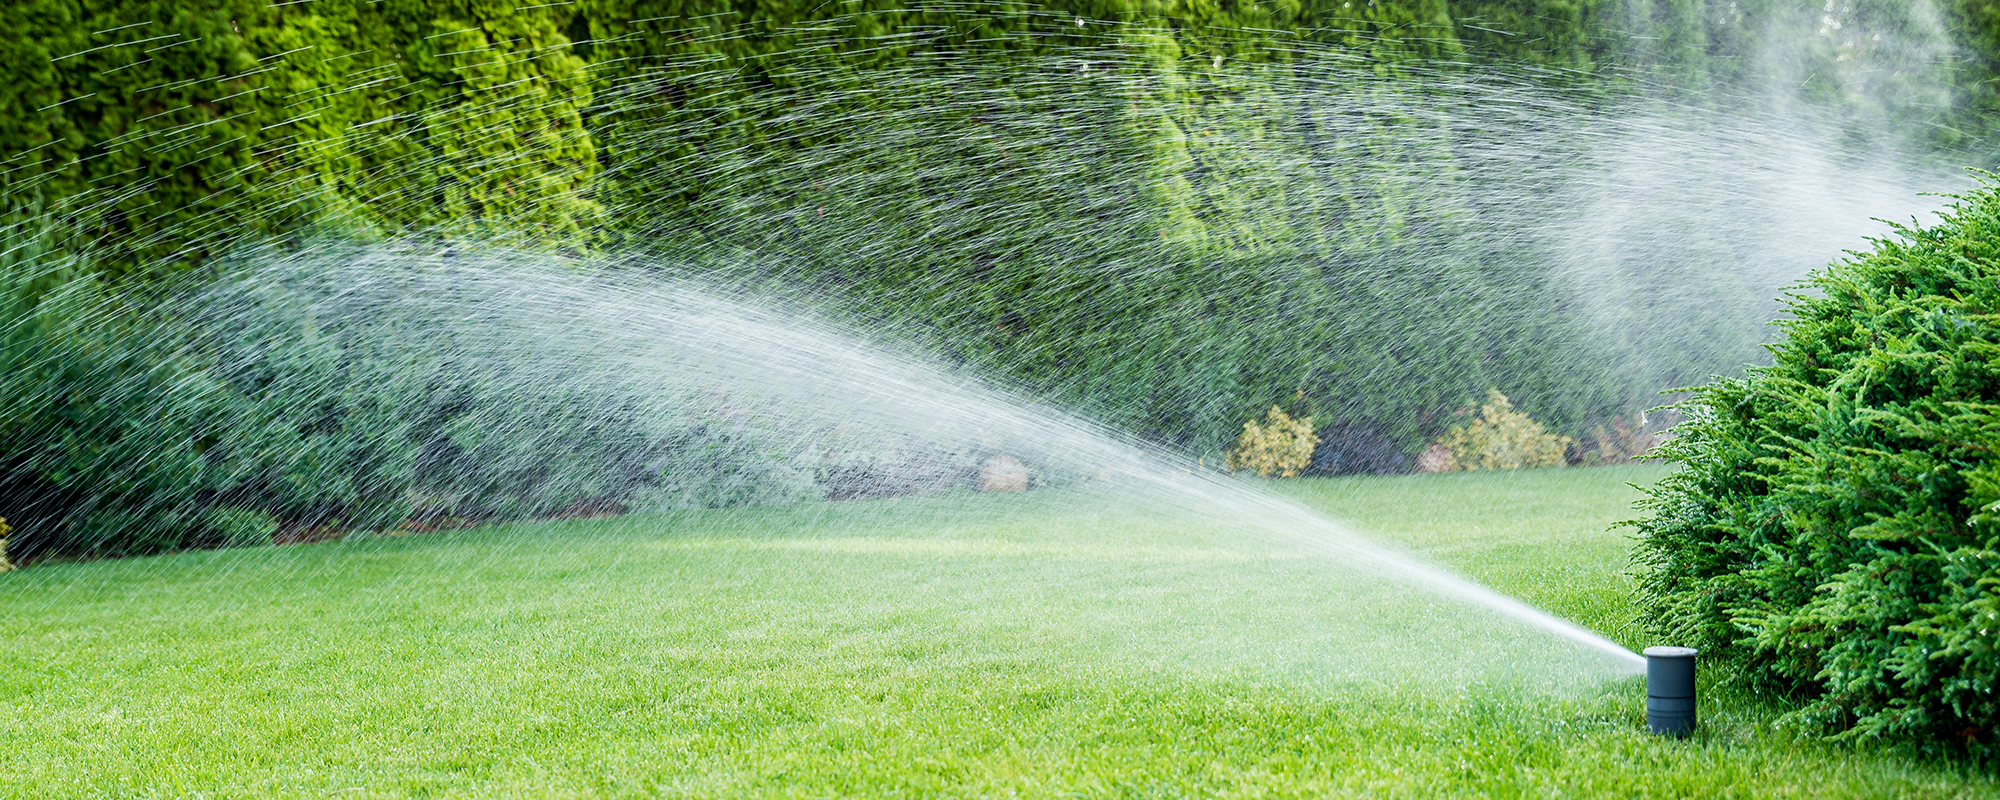 Irrigation of the green grass with sprinkler system